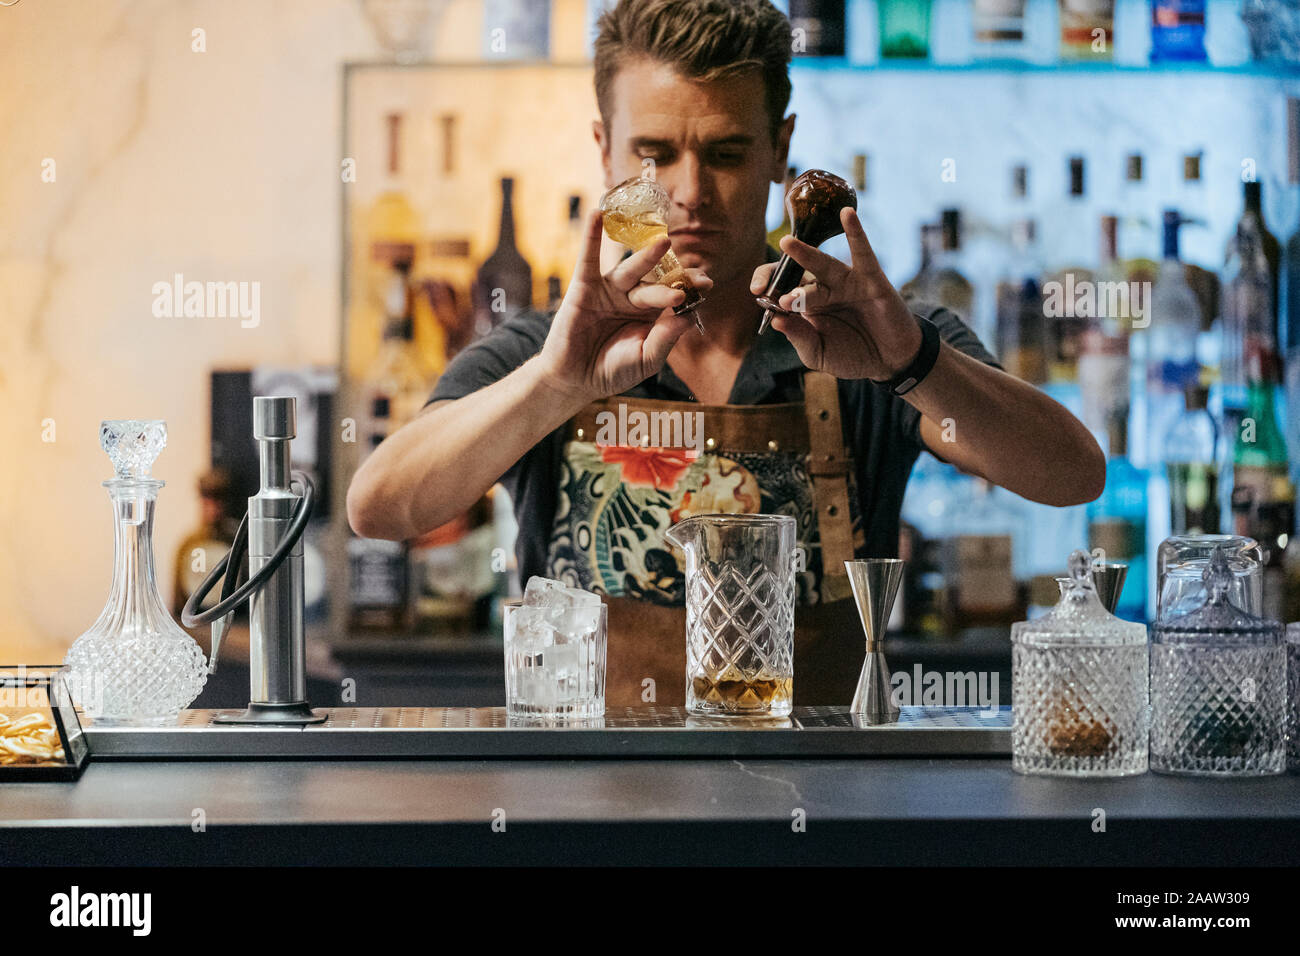 Bartender mixing cocktail in a bar Stock Photo